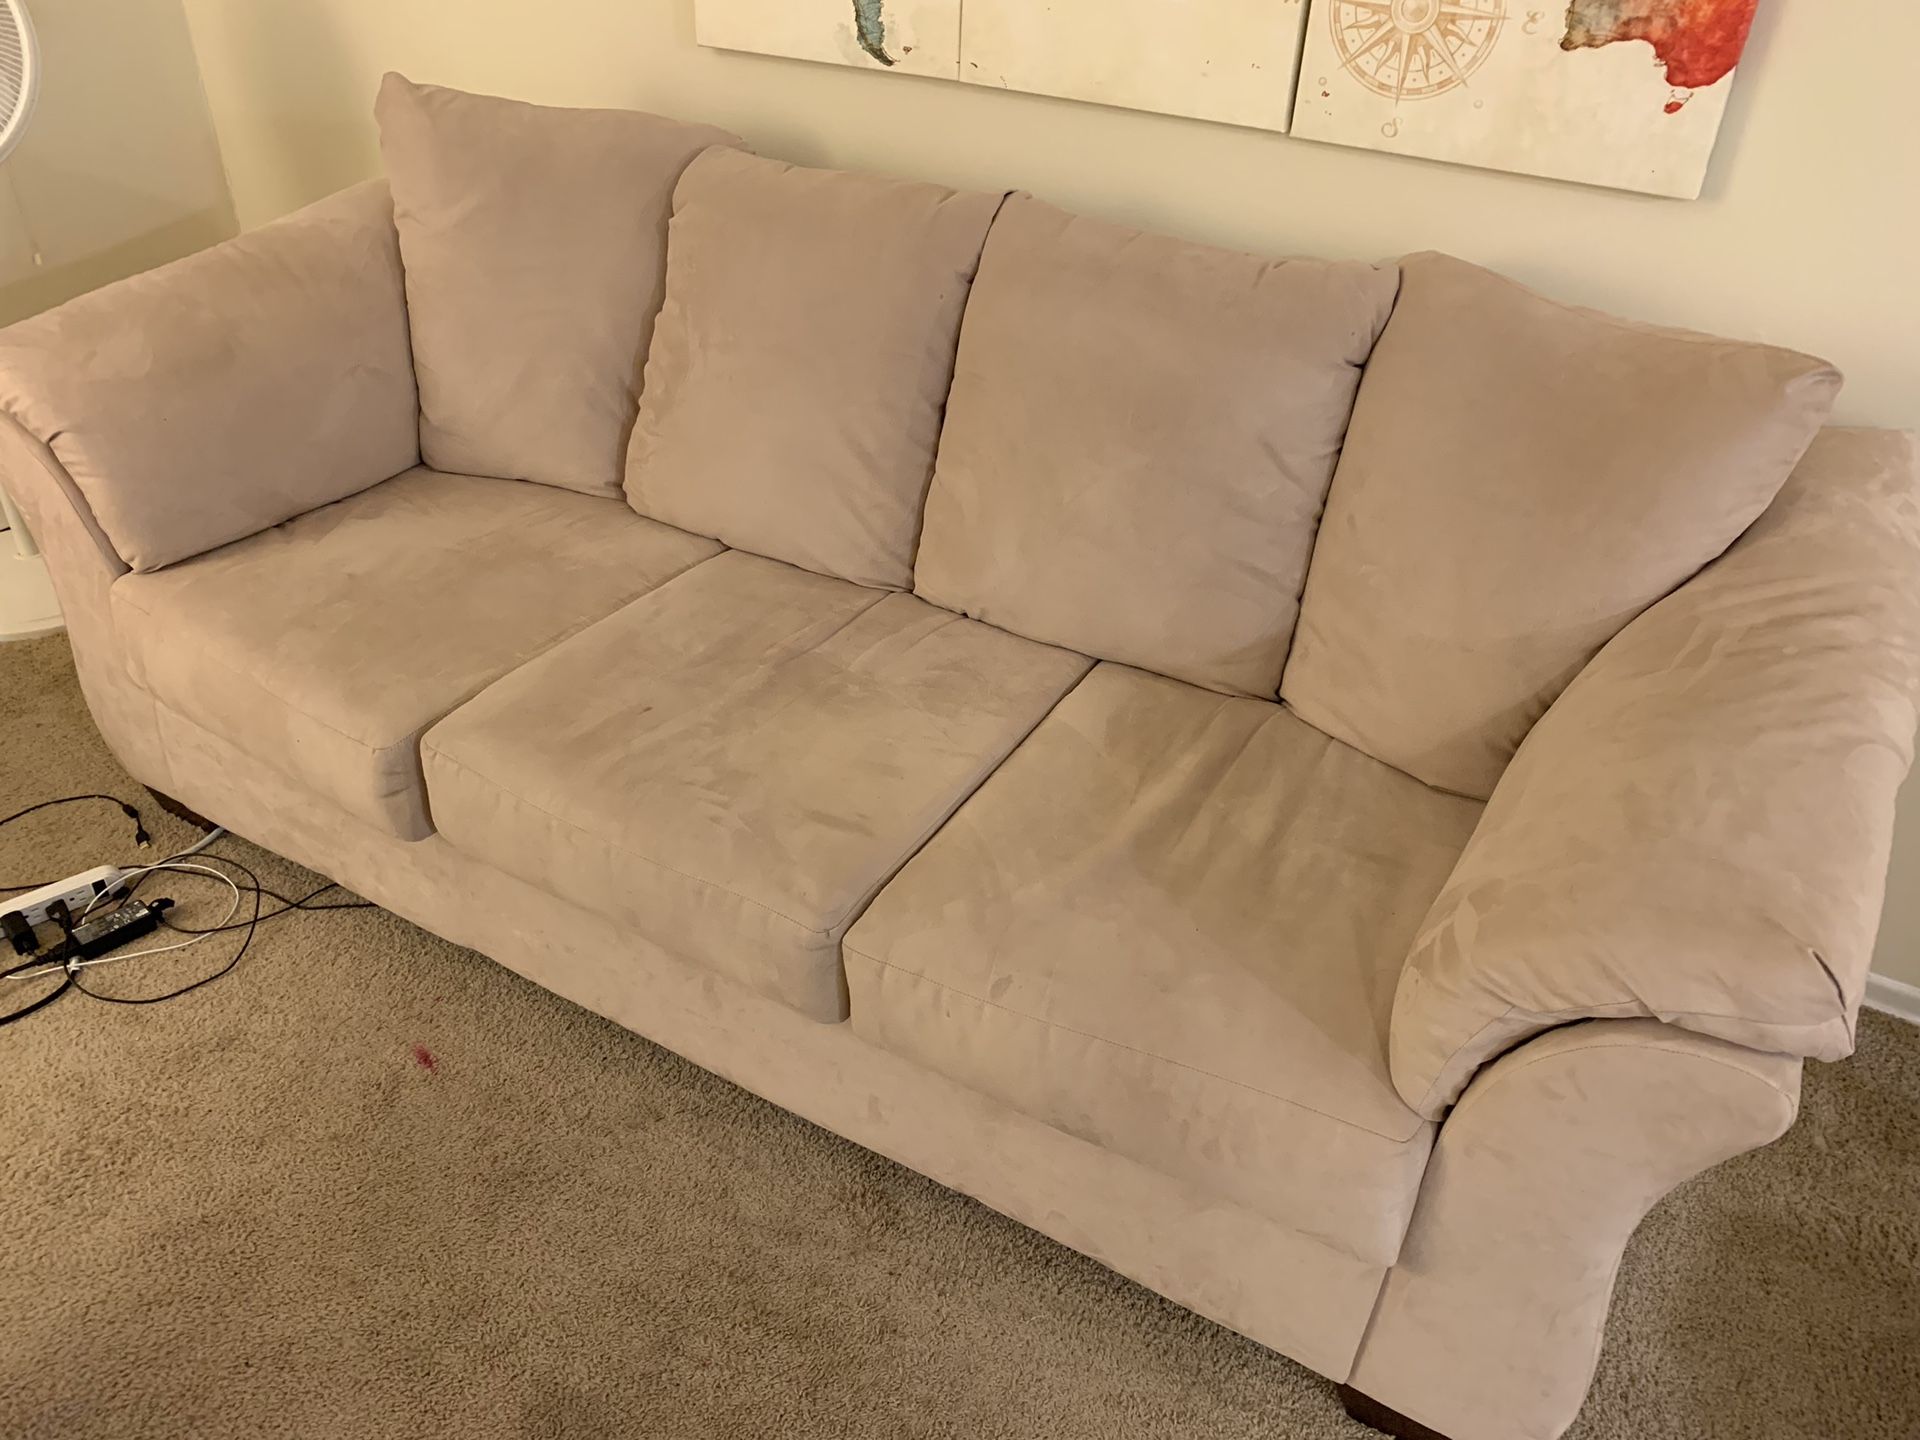 Cheap beautiful sturdy and comfortable couch